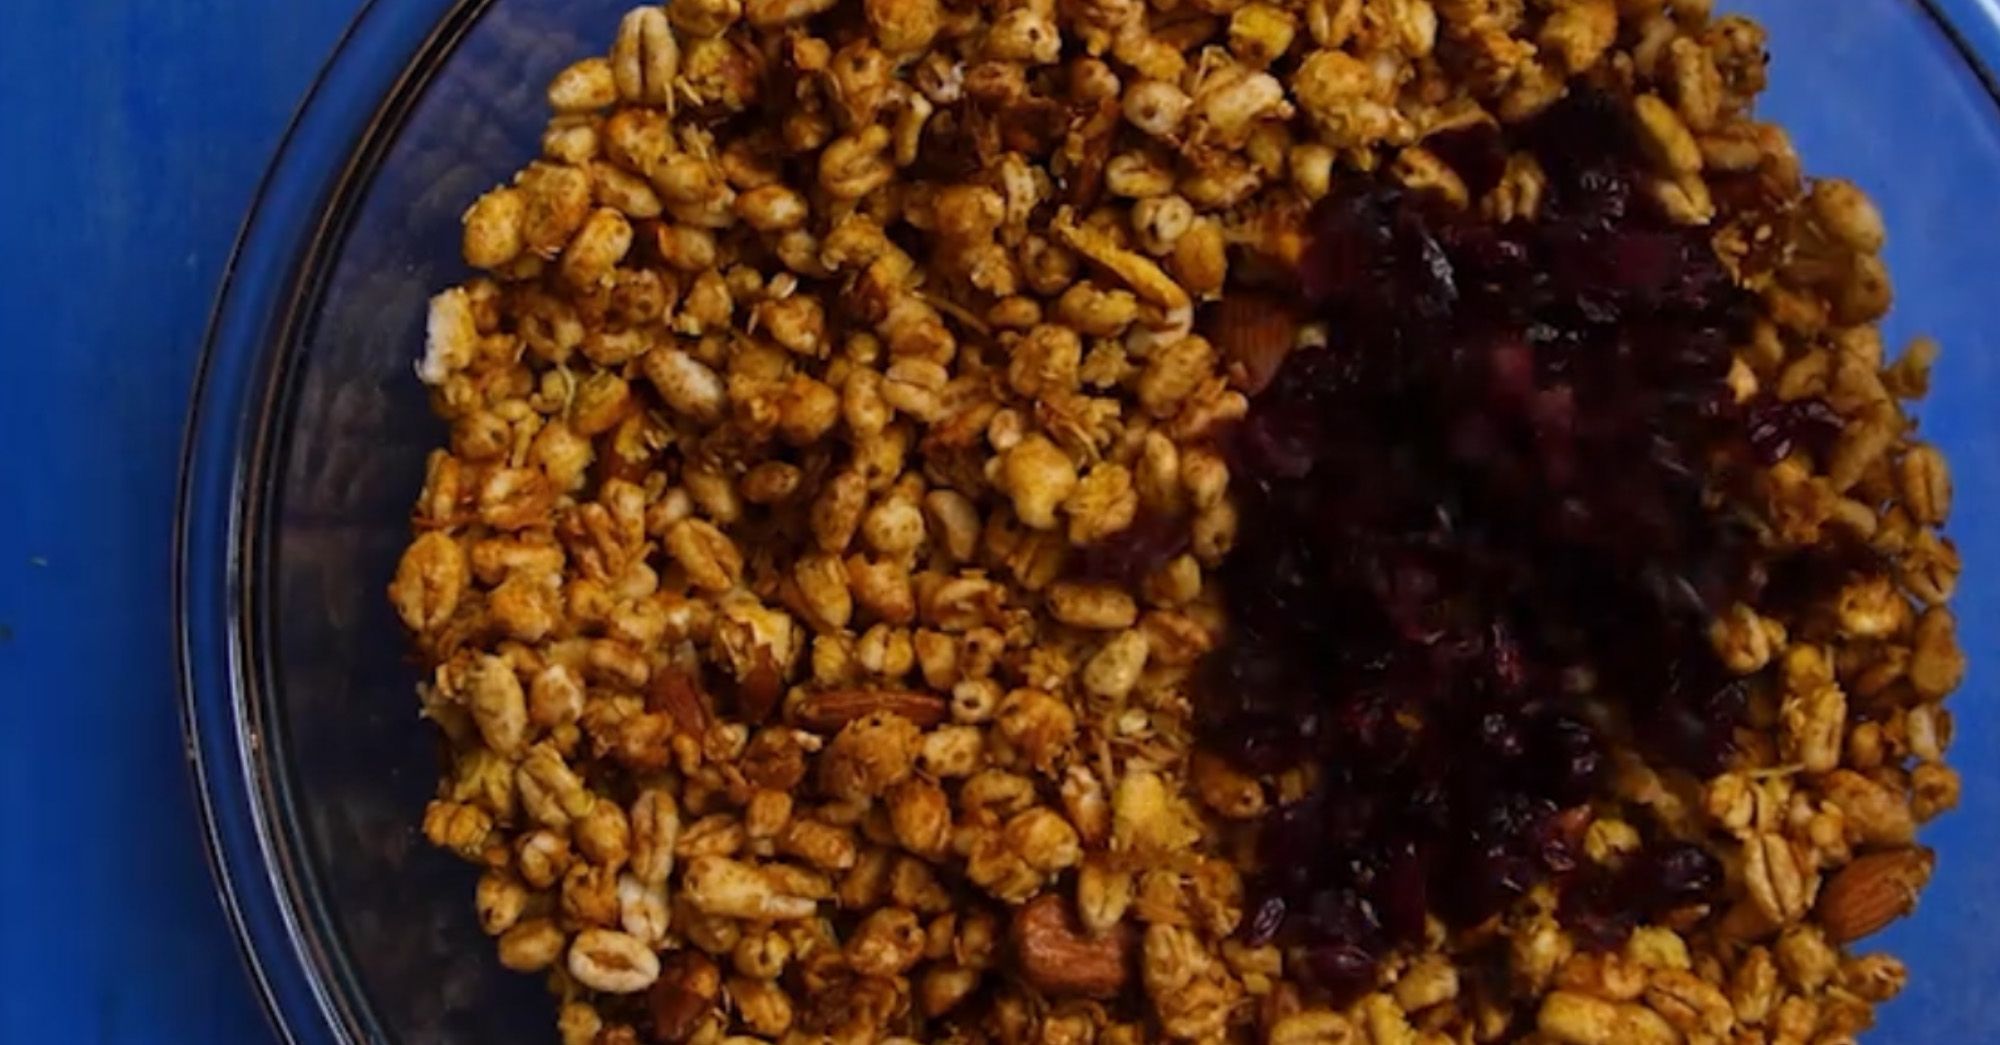 dried cranberries being added to cooked granola in a glass bowl